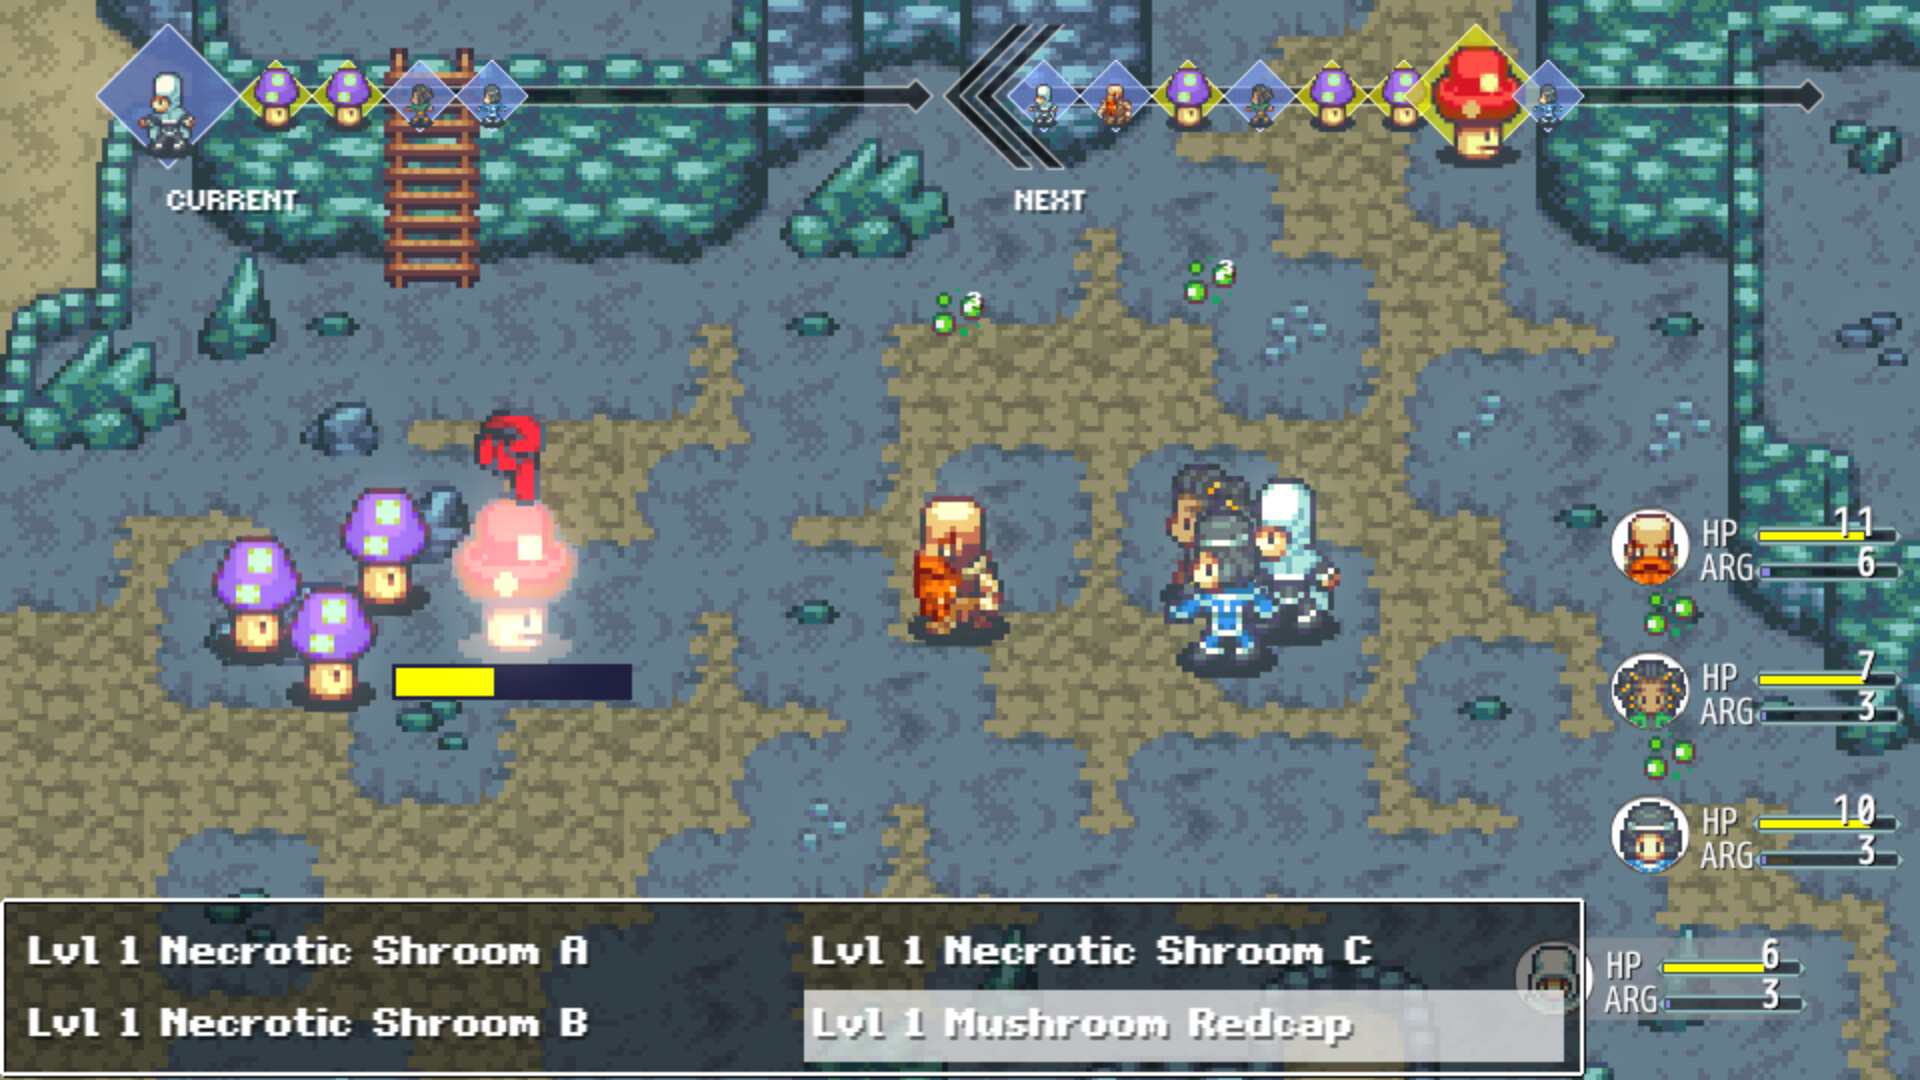 Fire Emblem creator's new strategy RPG is out now on Steam